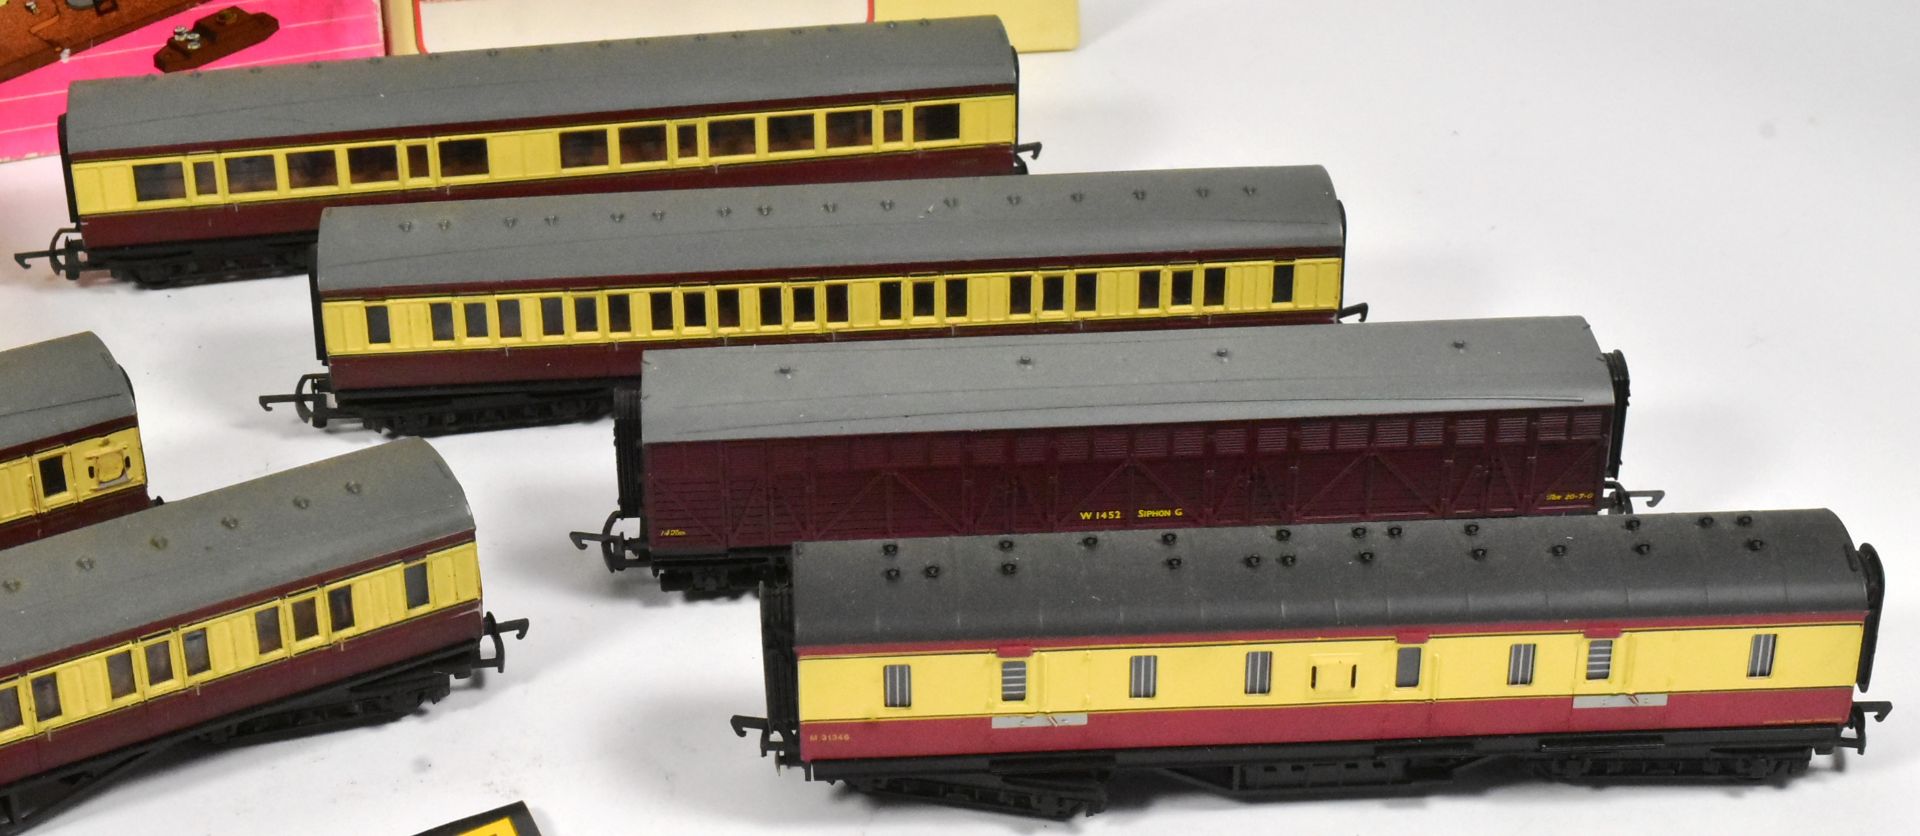 MODEL RAILWAY - COLLECTION OF OO GAUGE ROLLING STOCK, KITS & ACCESSORIES - Image 5 of 6